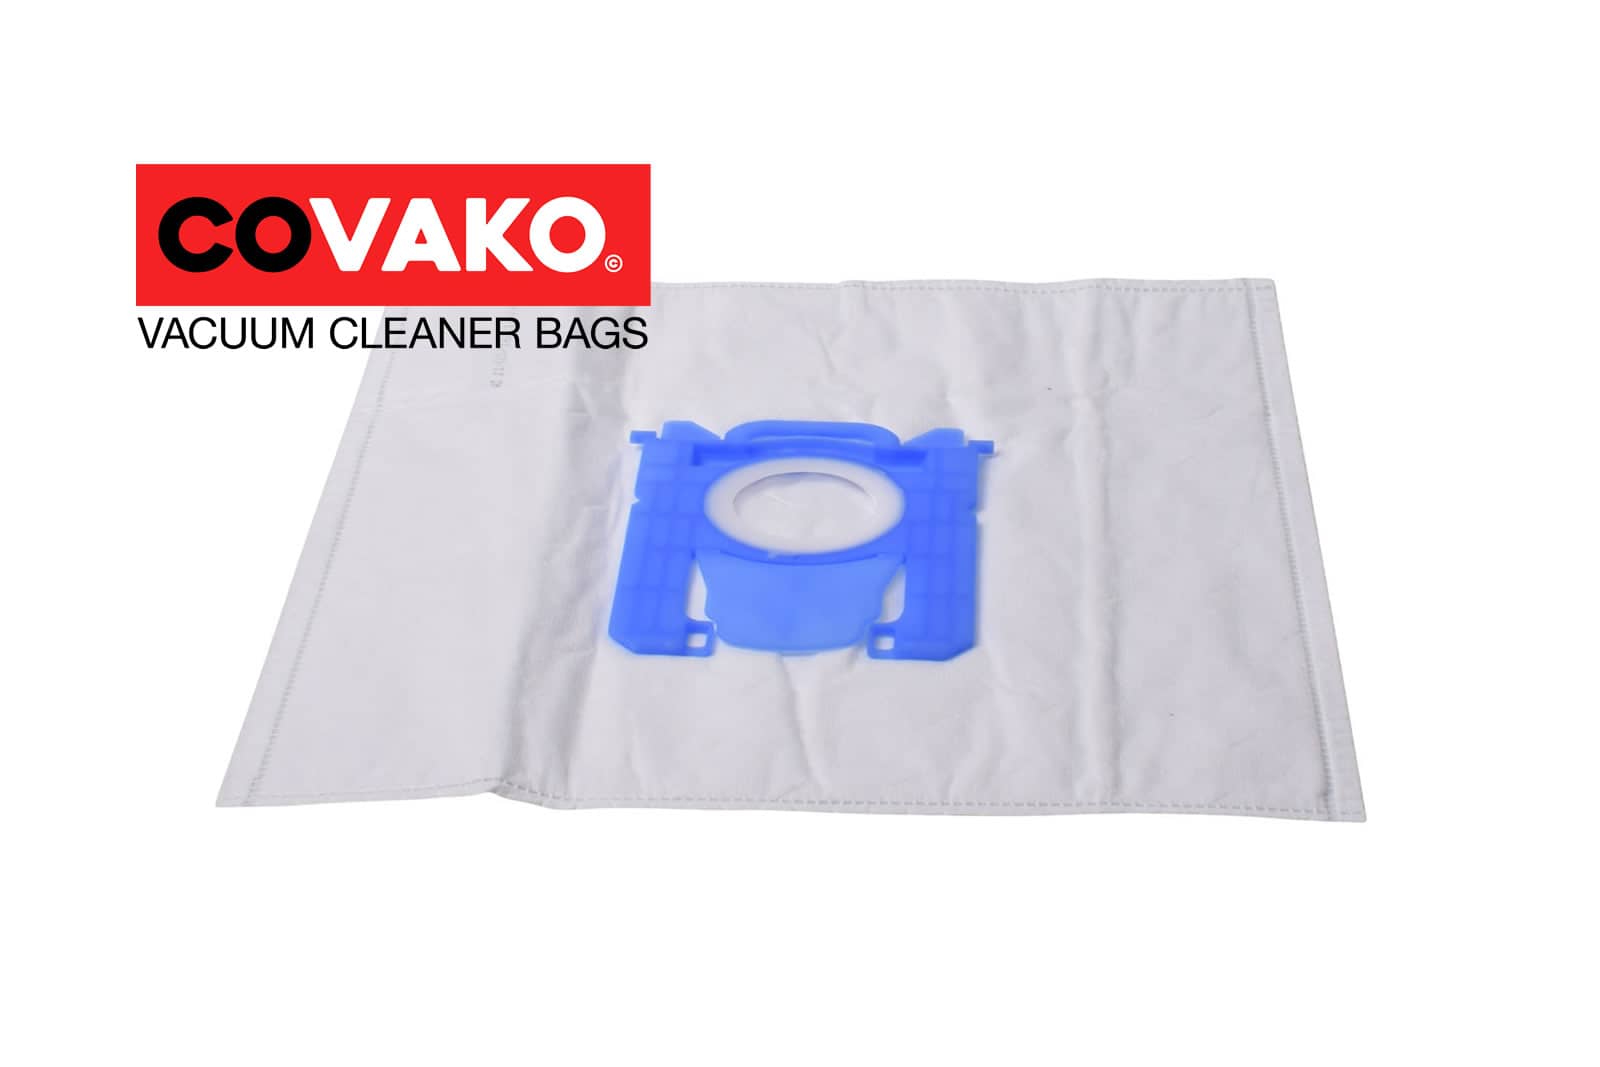 Electrolux AAM 6200 Öko-Air Max / Synthesis - Electrolux vacuum cleaner bags